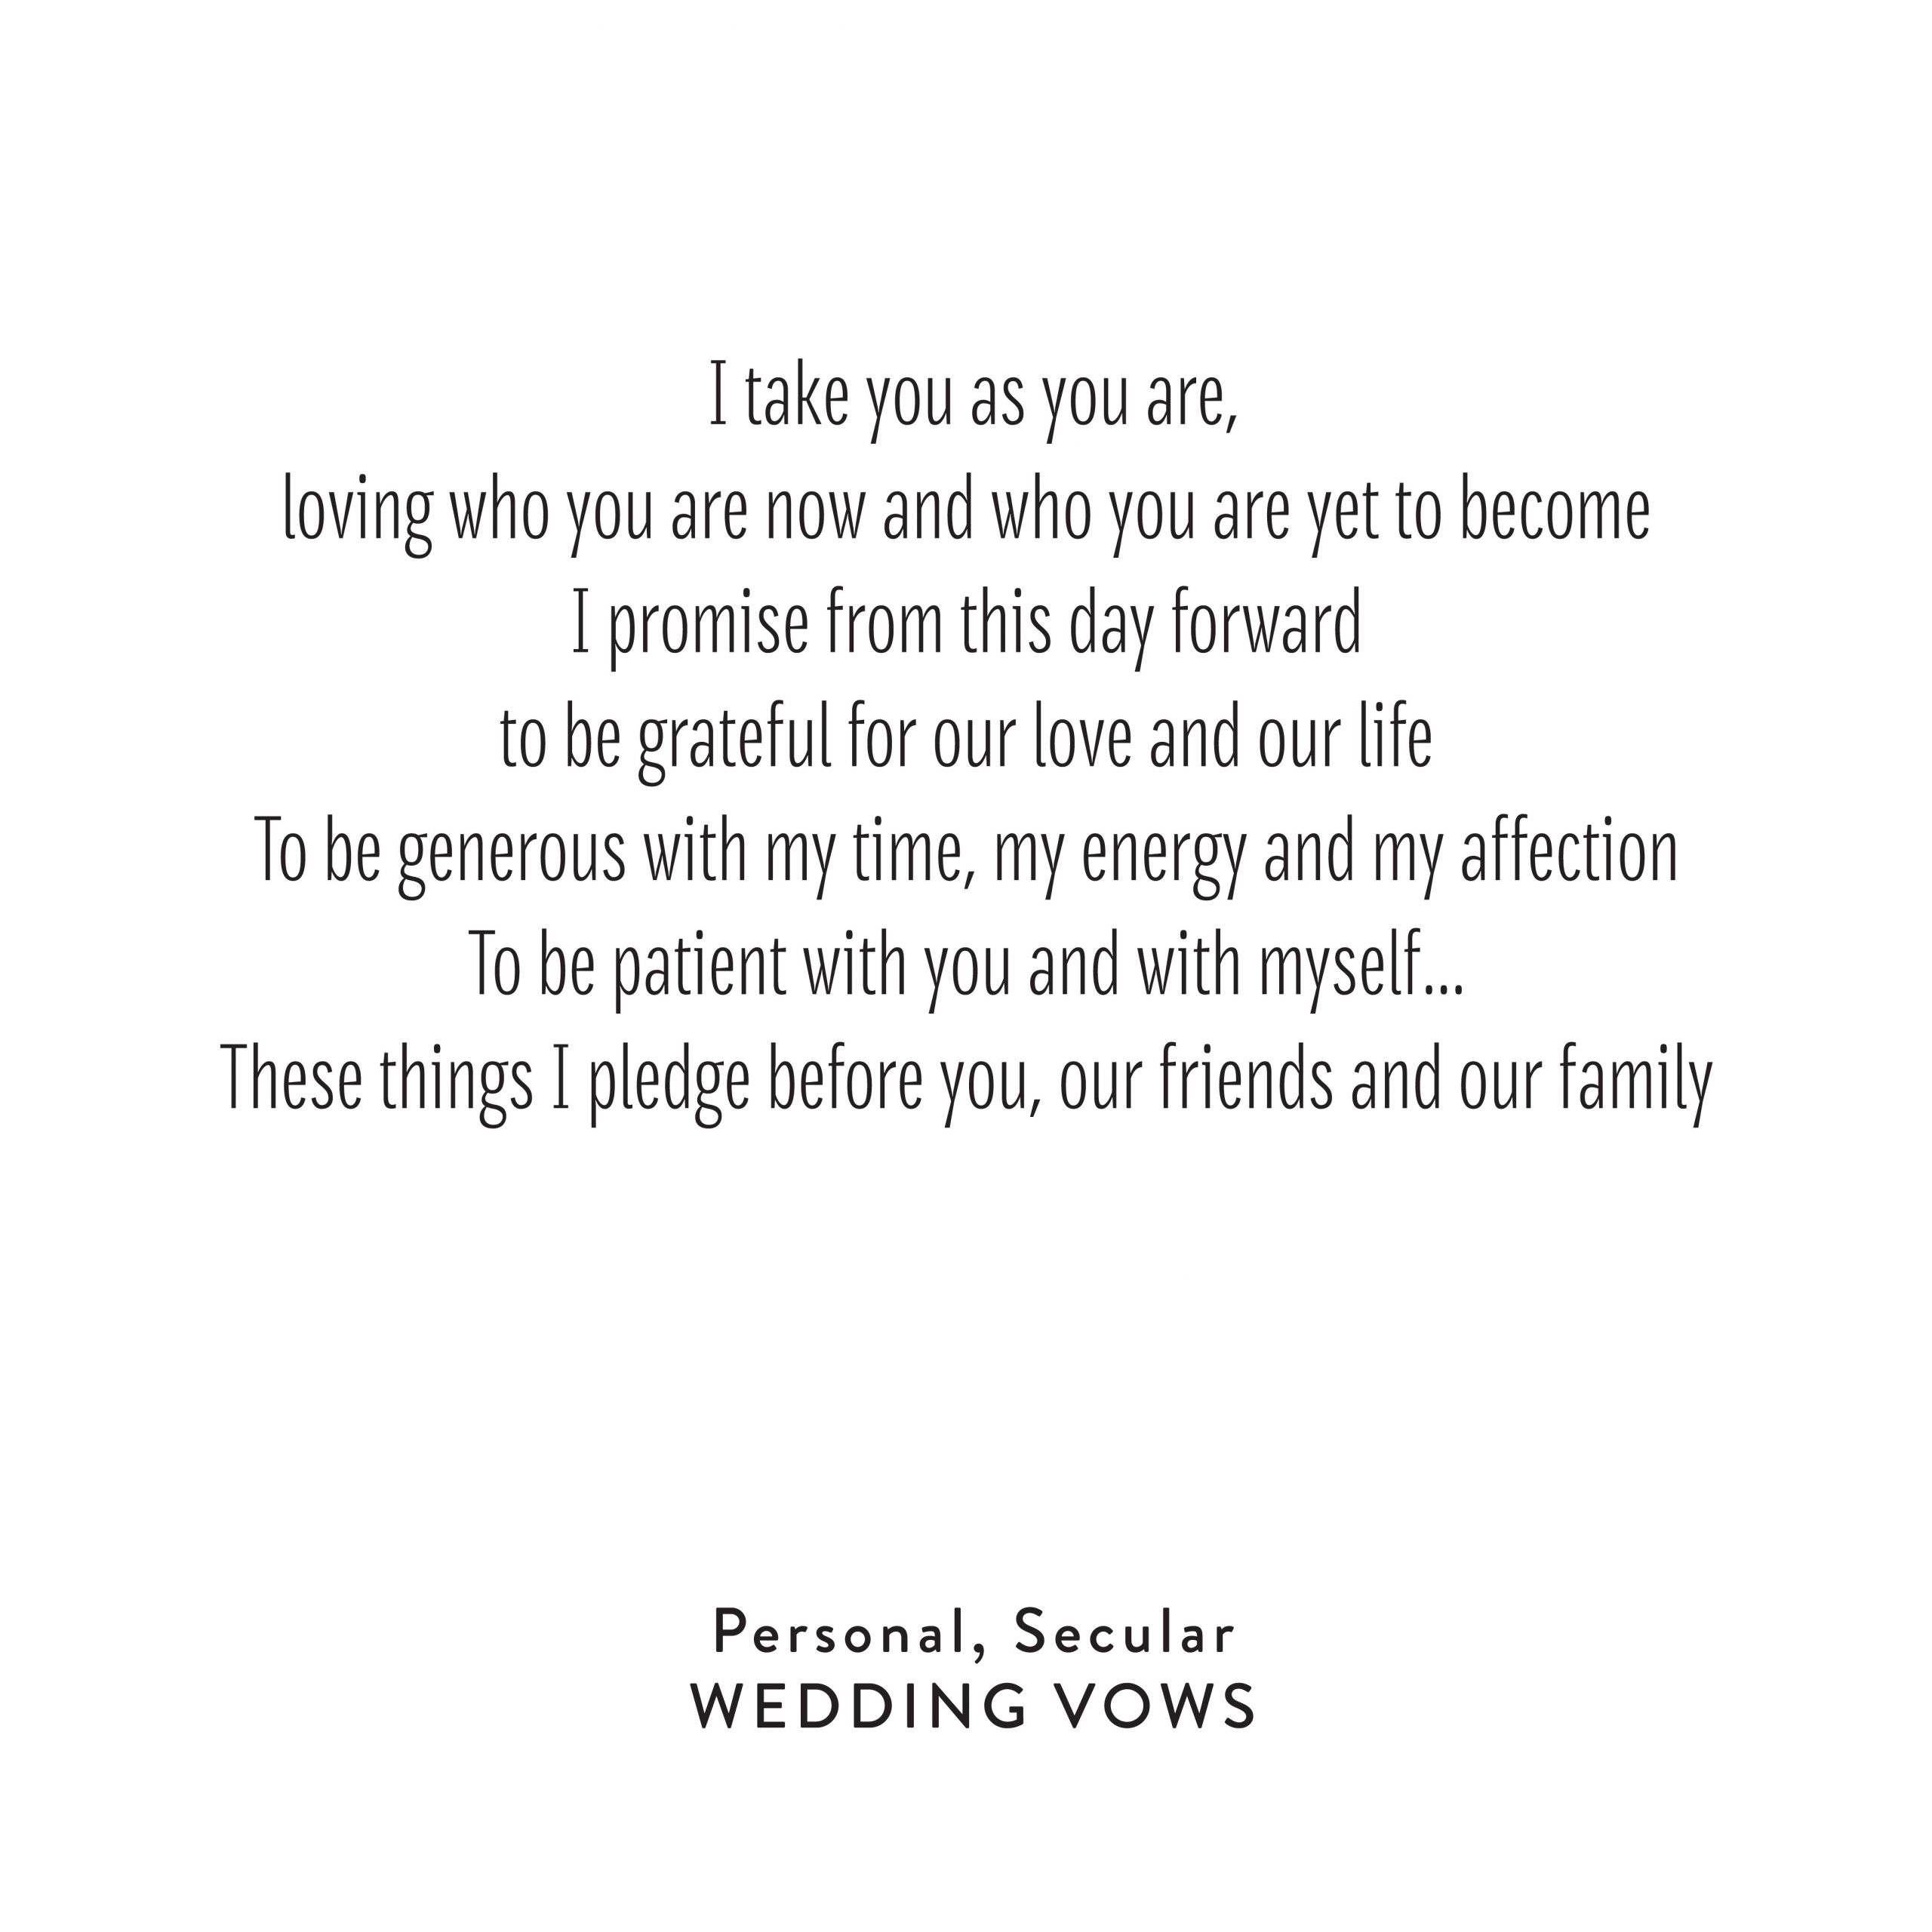 Sample Personal Wedding Vows
 Wedding Vows Personal Secular